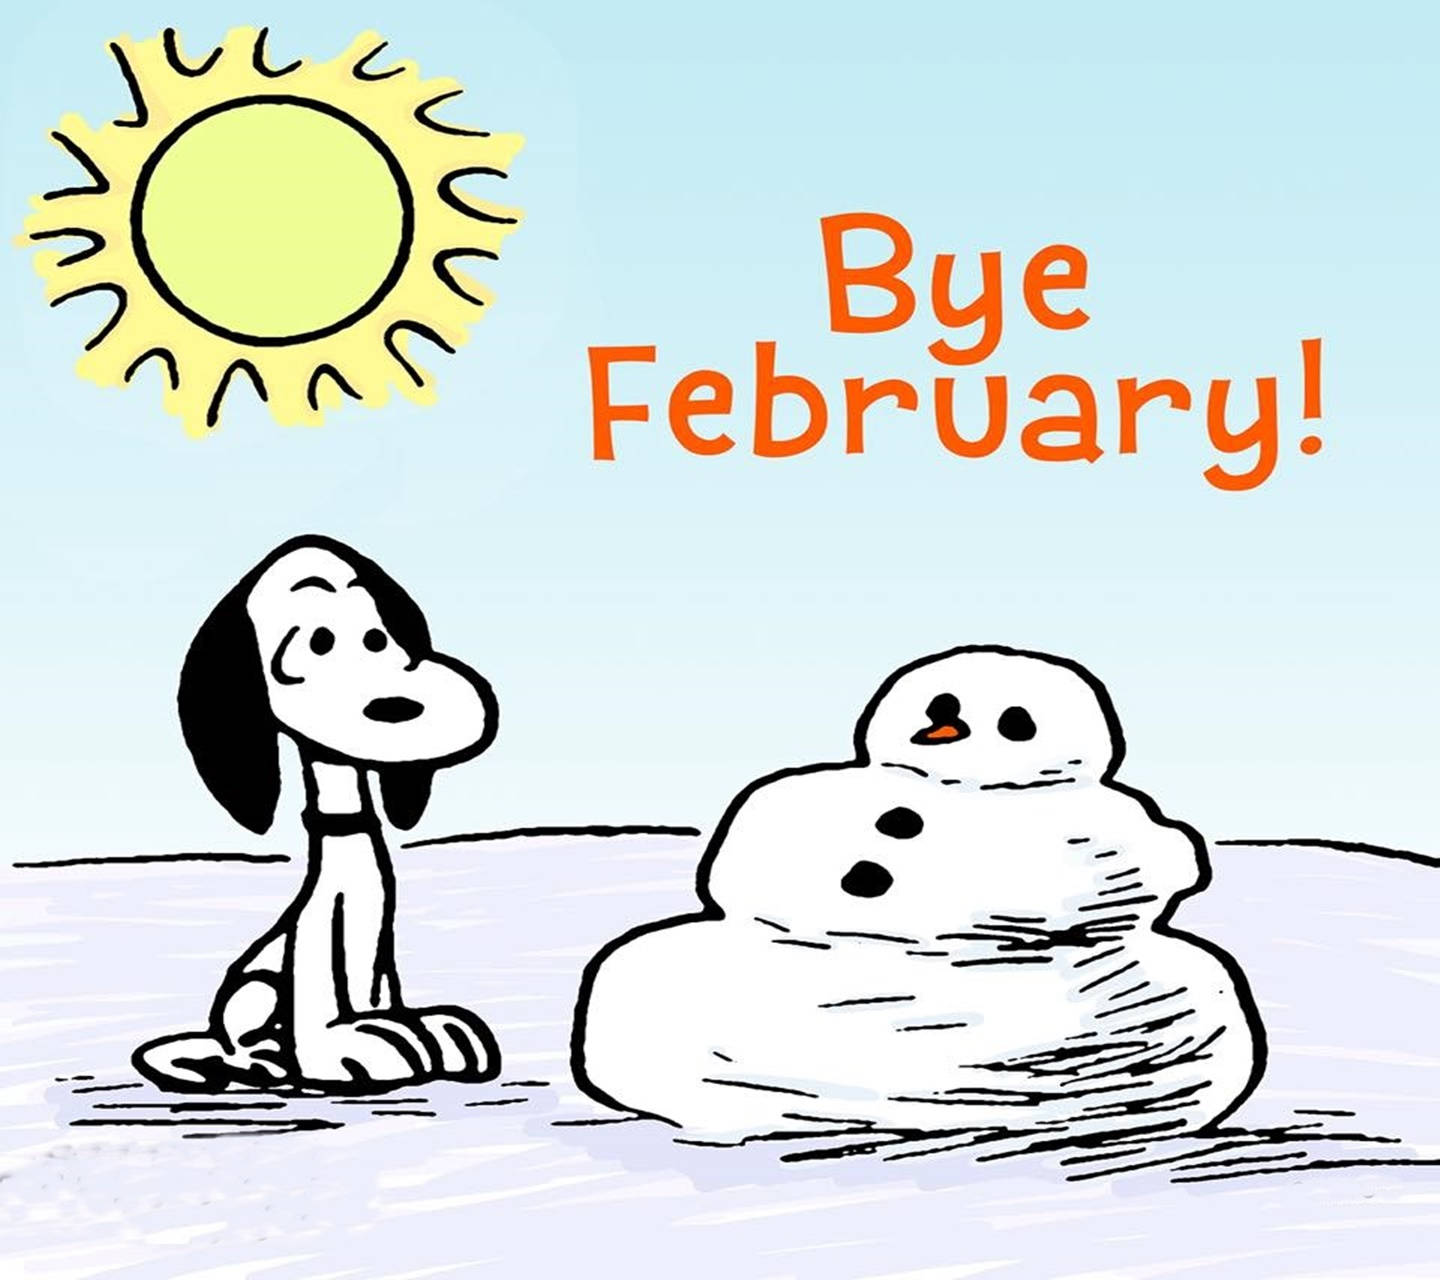 Say Goodbye To February With Snowman And Snoopy! Wallpaper